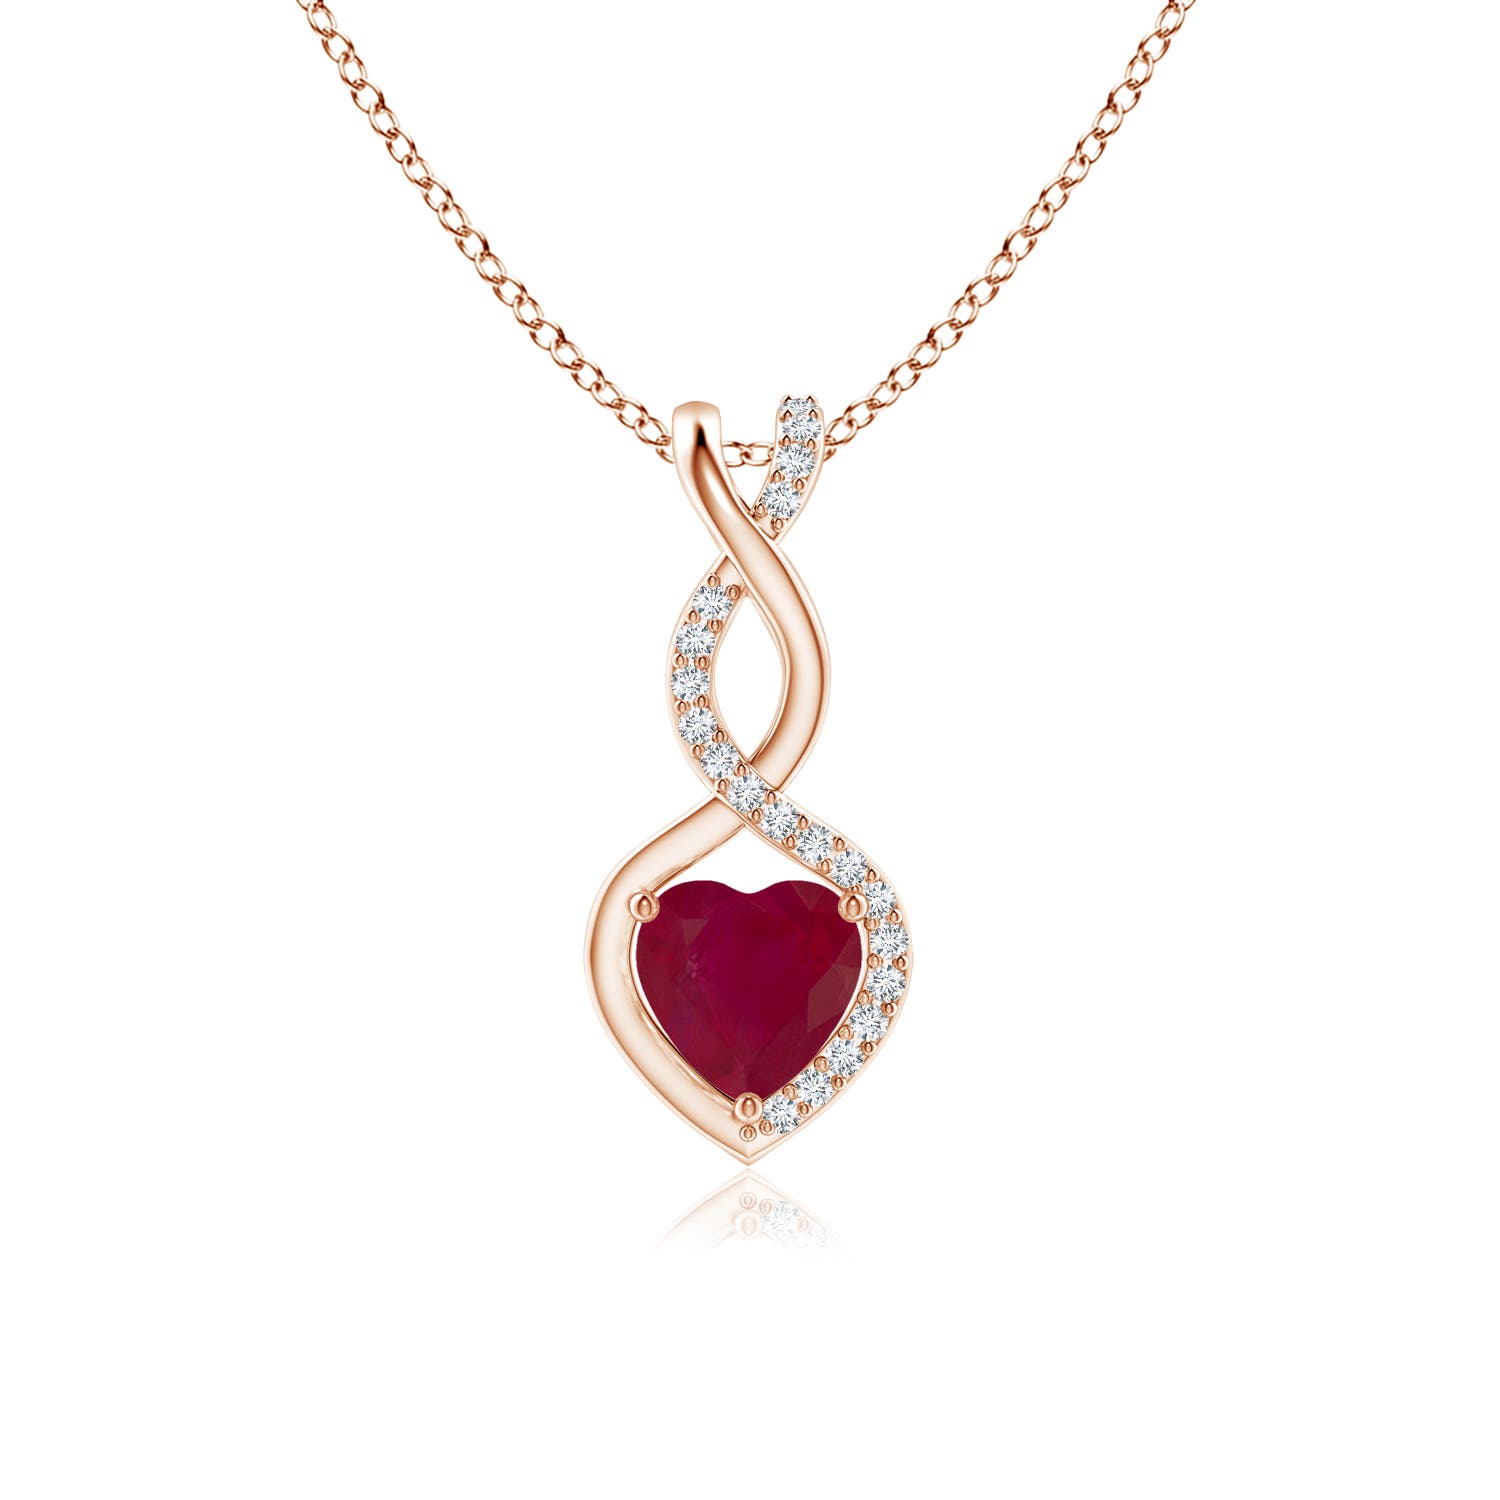 A - Ruby / 0.61 CT / 14 KT Rose Gold